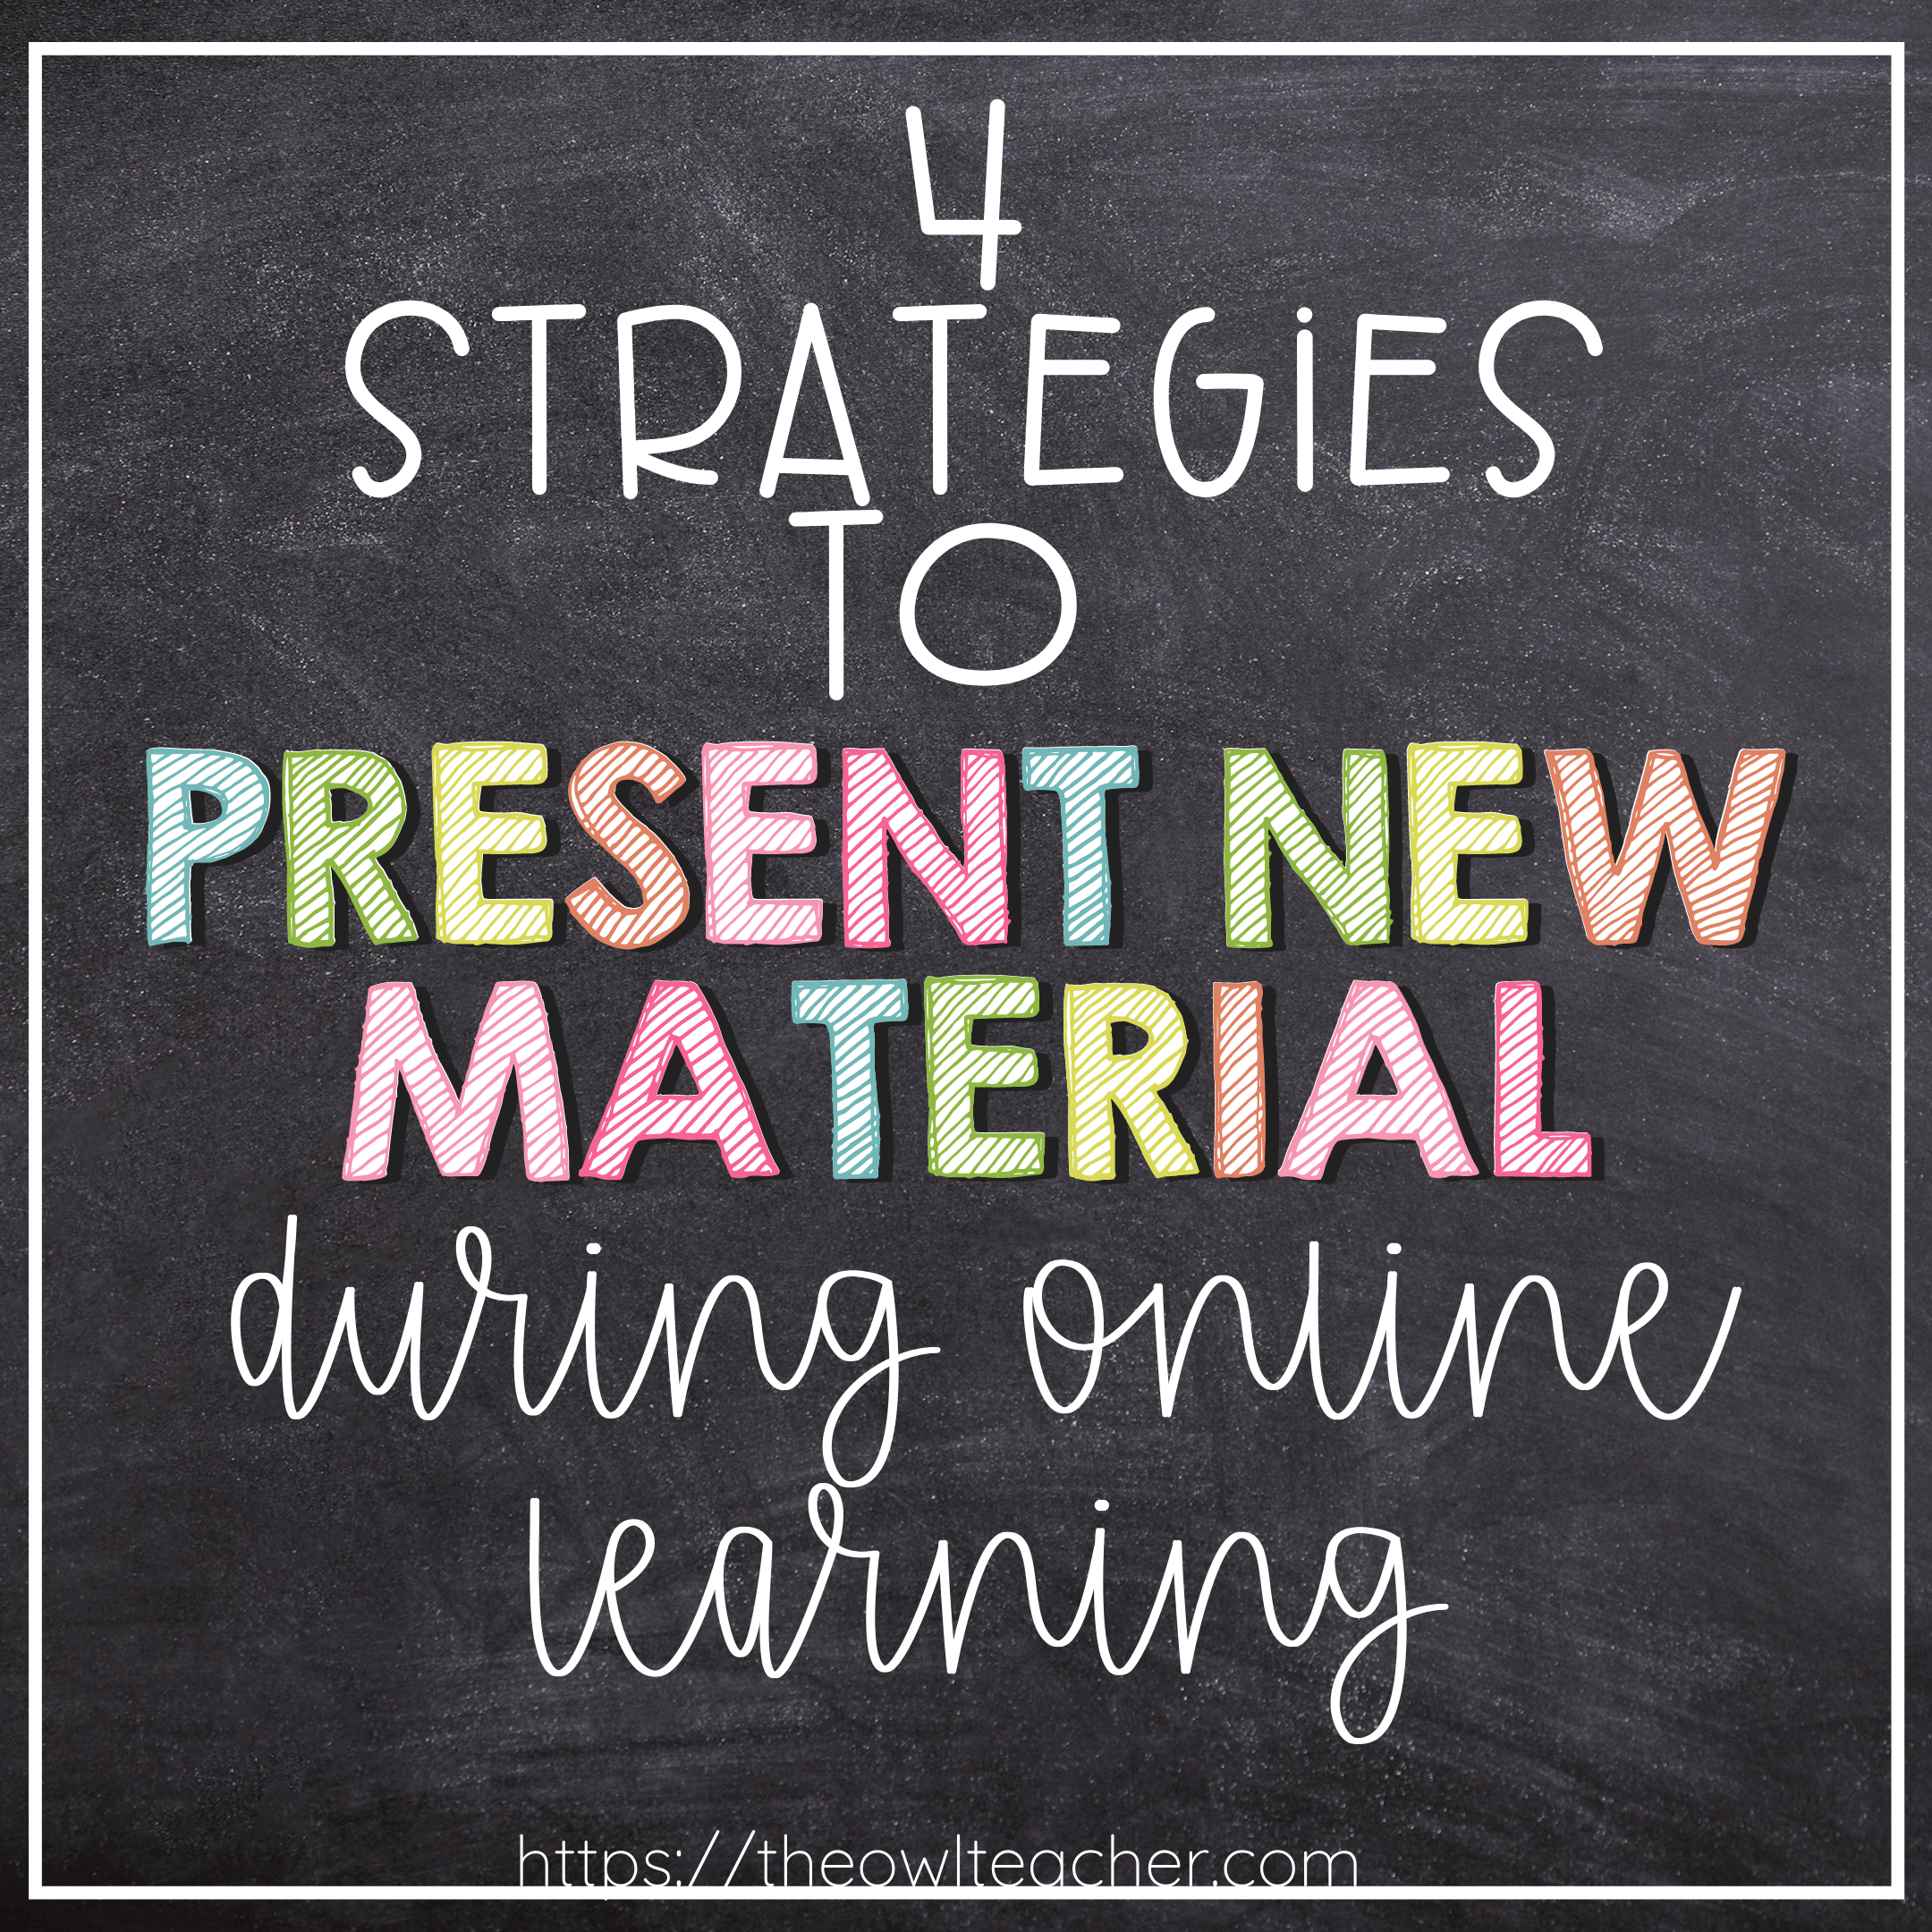 Are you trying to figure out how to present new material during online learning? This post has 4 tips to help you get started with distance learning or hybrid teaching.